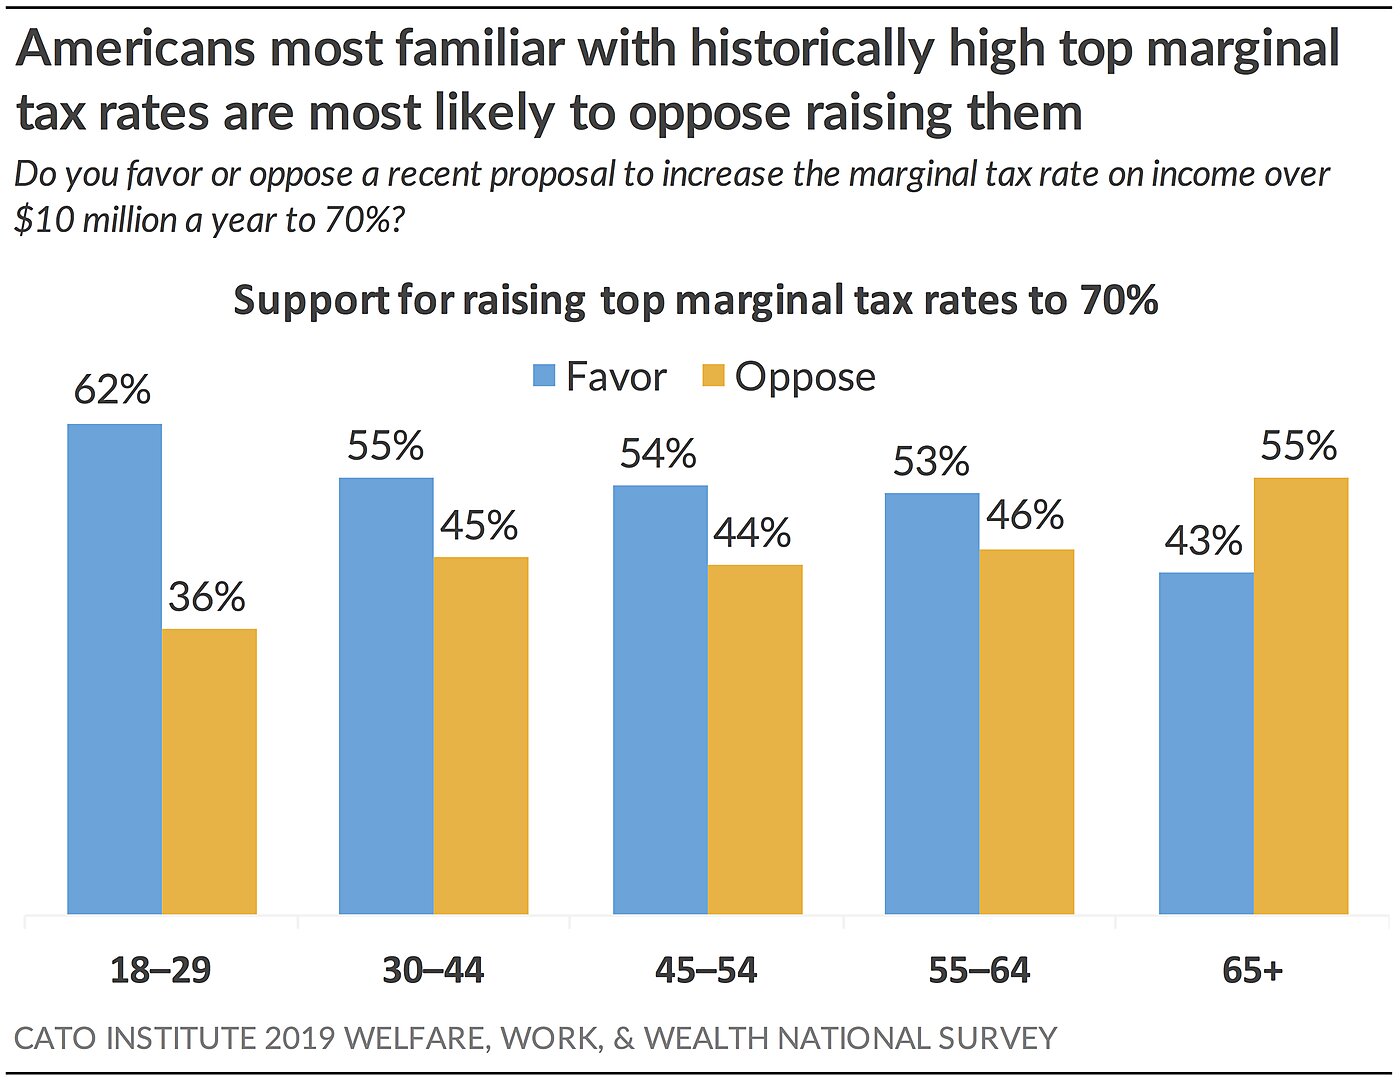 Familiar with Historically High Top Marginal Tax Rates Likely to Oppose